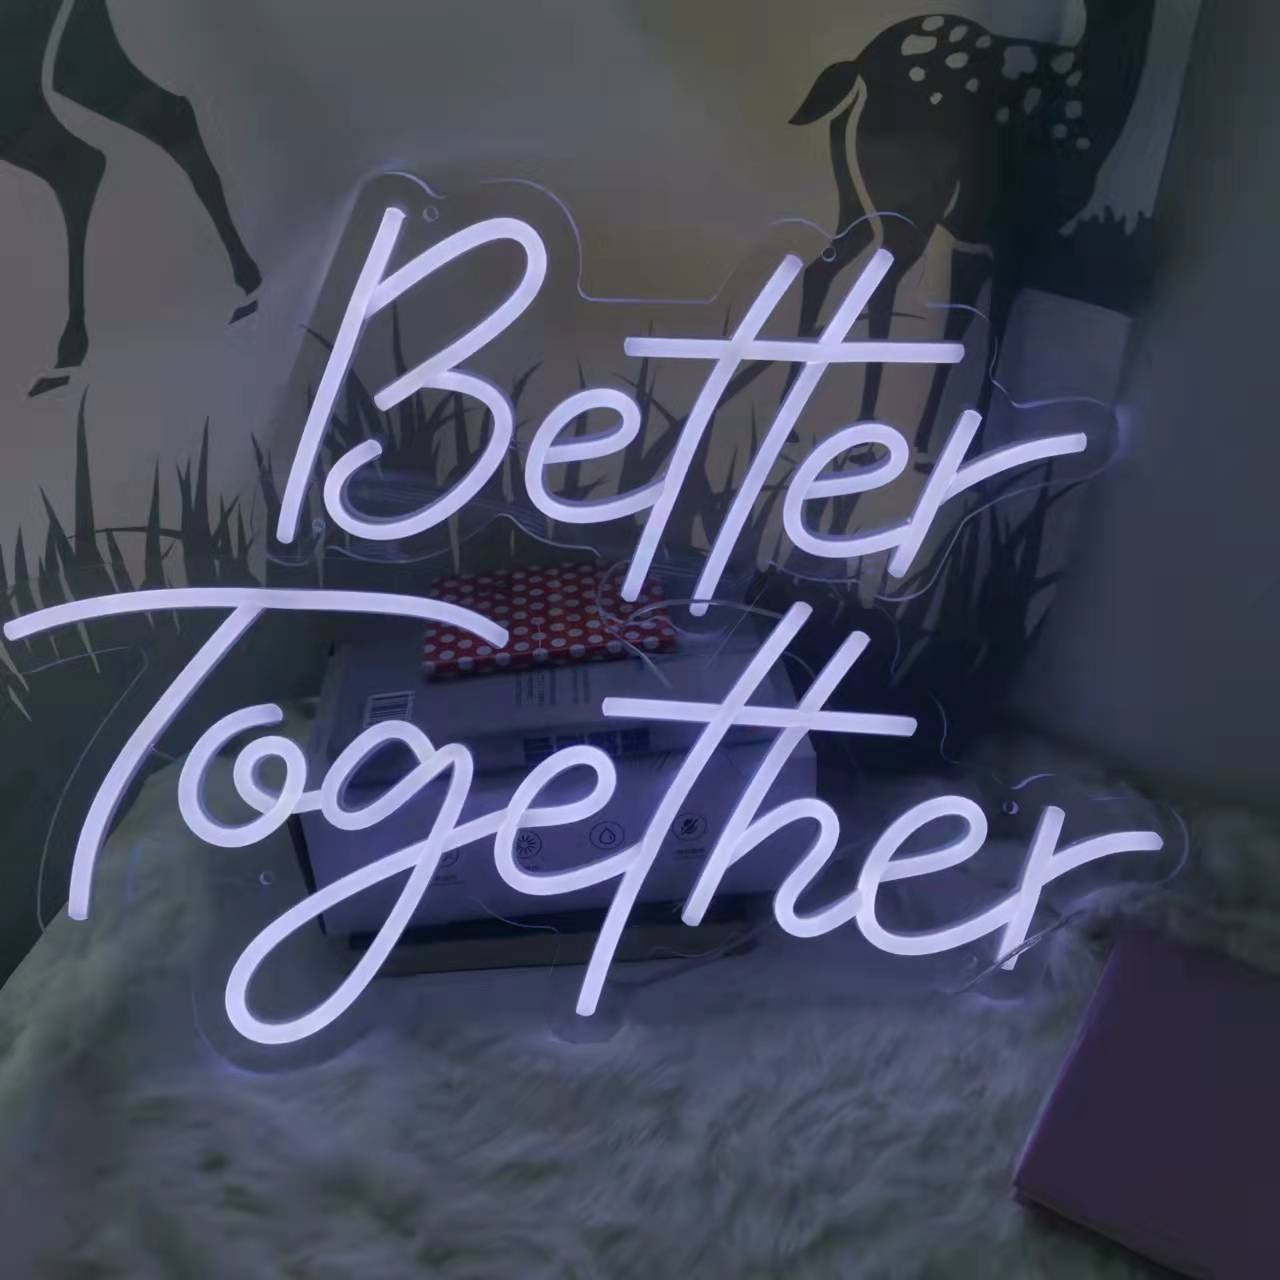 Basic font neon sign "Better Together"  in cold tone